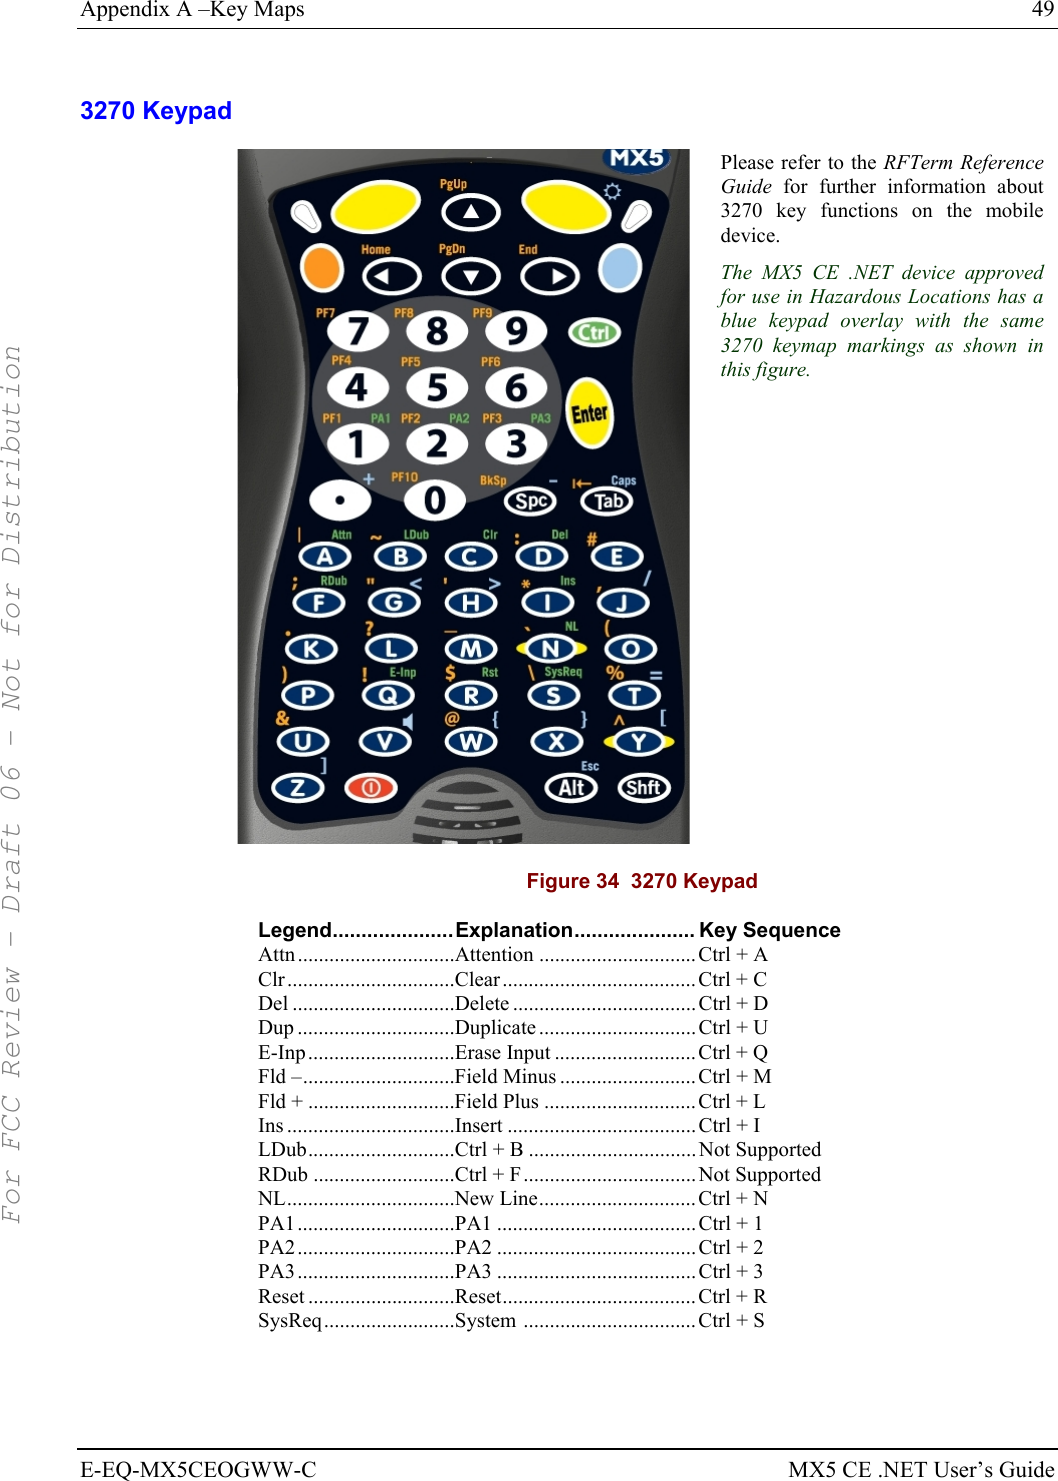 Appendix A –Key Maps  49 E-EQ-MX5CEOGWW-C  MX5 CE .NET User’s Guide 3270 Keypad  Please refer to the RFTerm Reference Guide for further information about 3270 key functions on the mobile device. The MX5 CE .NET device approved for use in Hazardous Locations has a blue keypad overlay with the same 3270 keymap markings as shown in this figure.   Figure 34  3270 Keypad Legend.....................Explanation..................... Key Sequence Attn..............................Attention .............................. Ctrl + A Clr................................Clear..................................... Ctrl + C Del ...............................Delete ................................... Ctrl + D Dup ..............................Duplicate ..............................Ctrl + U E-Inp............................Erase Input ........................... Ctrl + Q Fld –.............................Field Minus ..........................Ctrl + M Fld + ............................Field Plus .............................Ctrl + L Ins ................................Insert ....................................Ctrl + I LDub............................Ctrl + B ................................ Not Supported RDub ...........................Ctrl + F................................. Not Supported NL................................New Line..............................Ctrl + N PA1..............................PA1 ......................................Ctrl + 1 PA2..............................PA2 ......................................Ctrl + 2 PA3..............................PA3 ......................................Ctrl + 3 Reset ............................Reset..................................... Ctrl + R SysReq.........................System .................................Ctrl + S   For FCC Review - Draft 06 - Not for Distribution